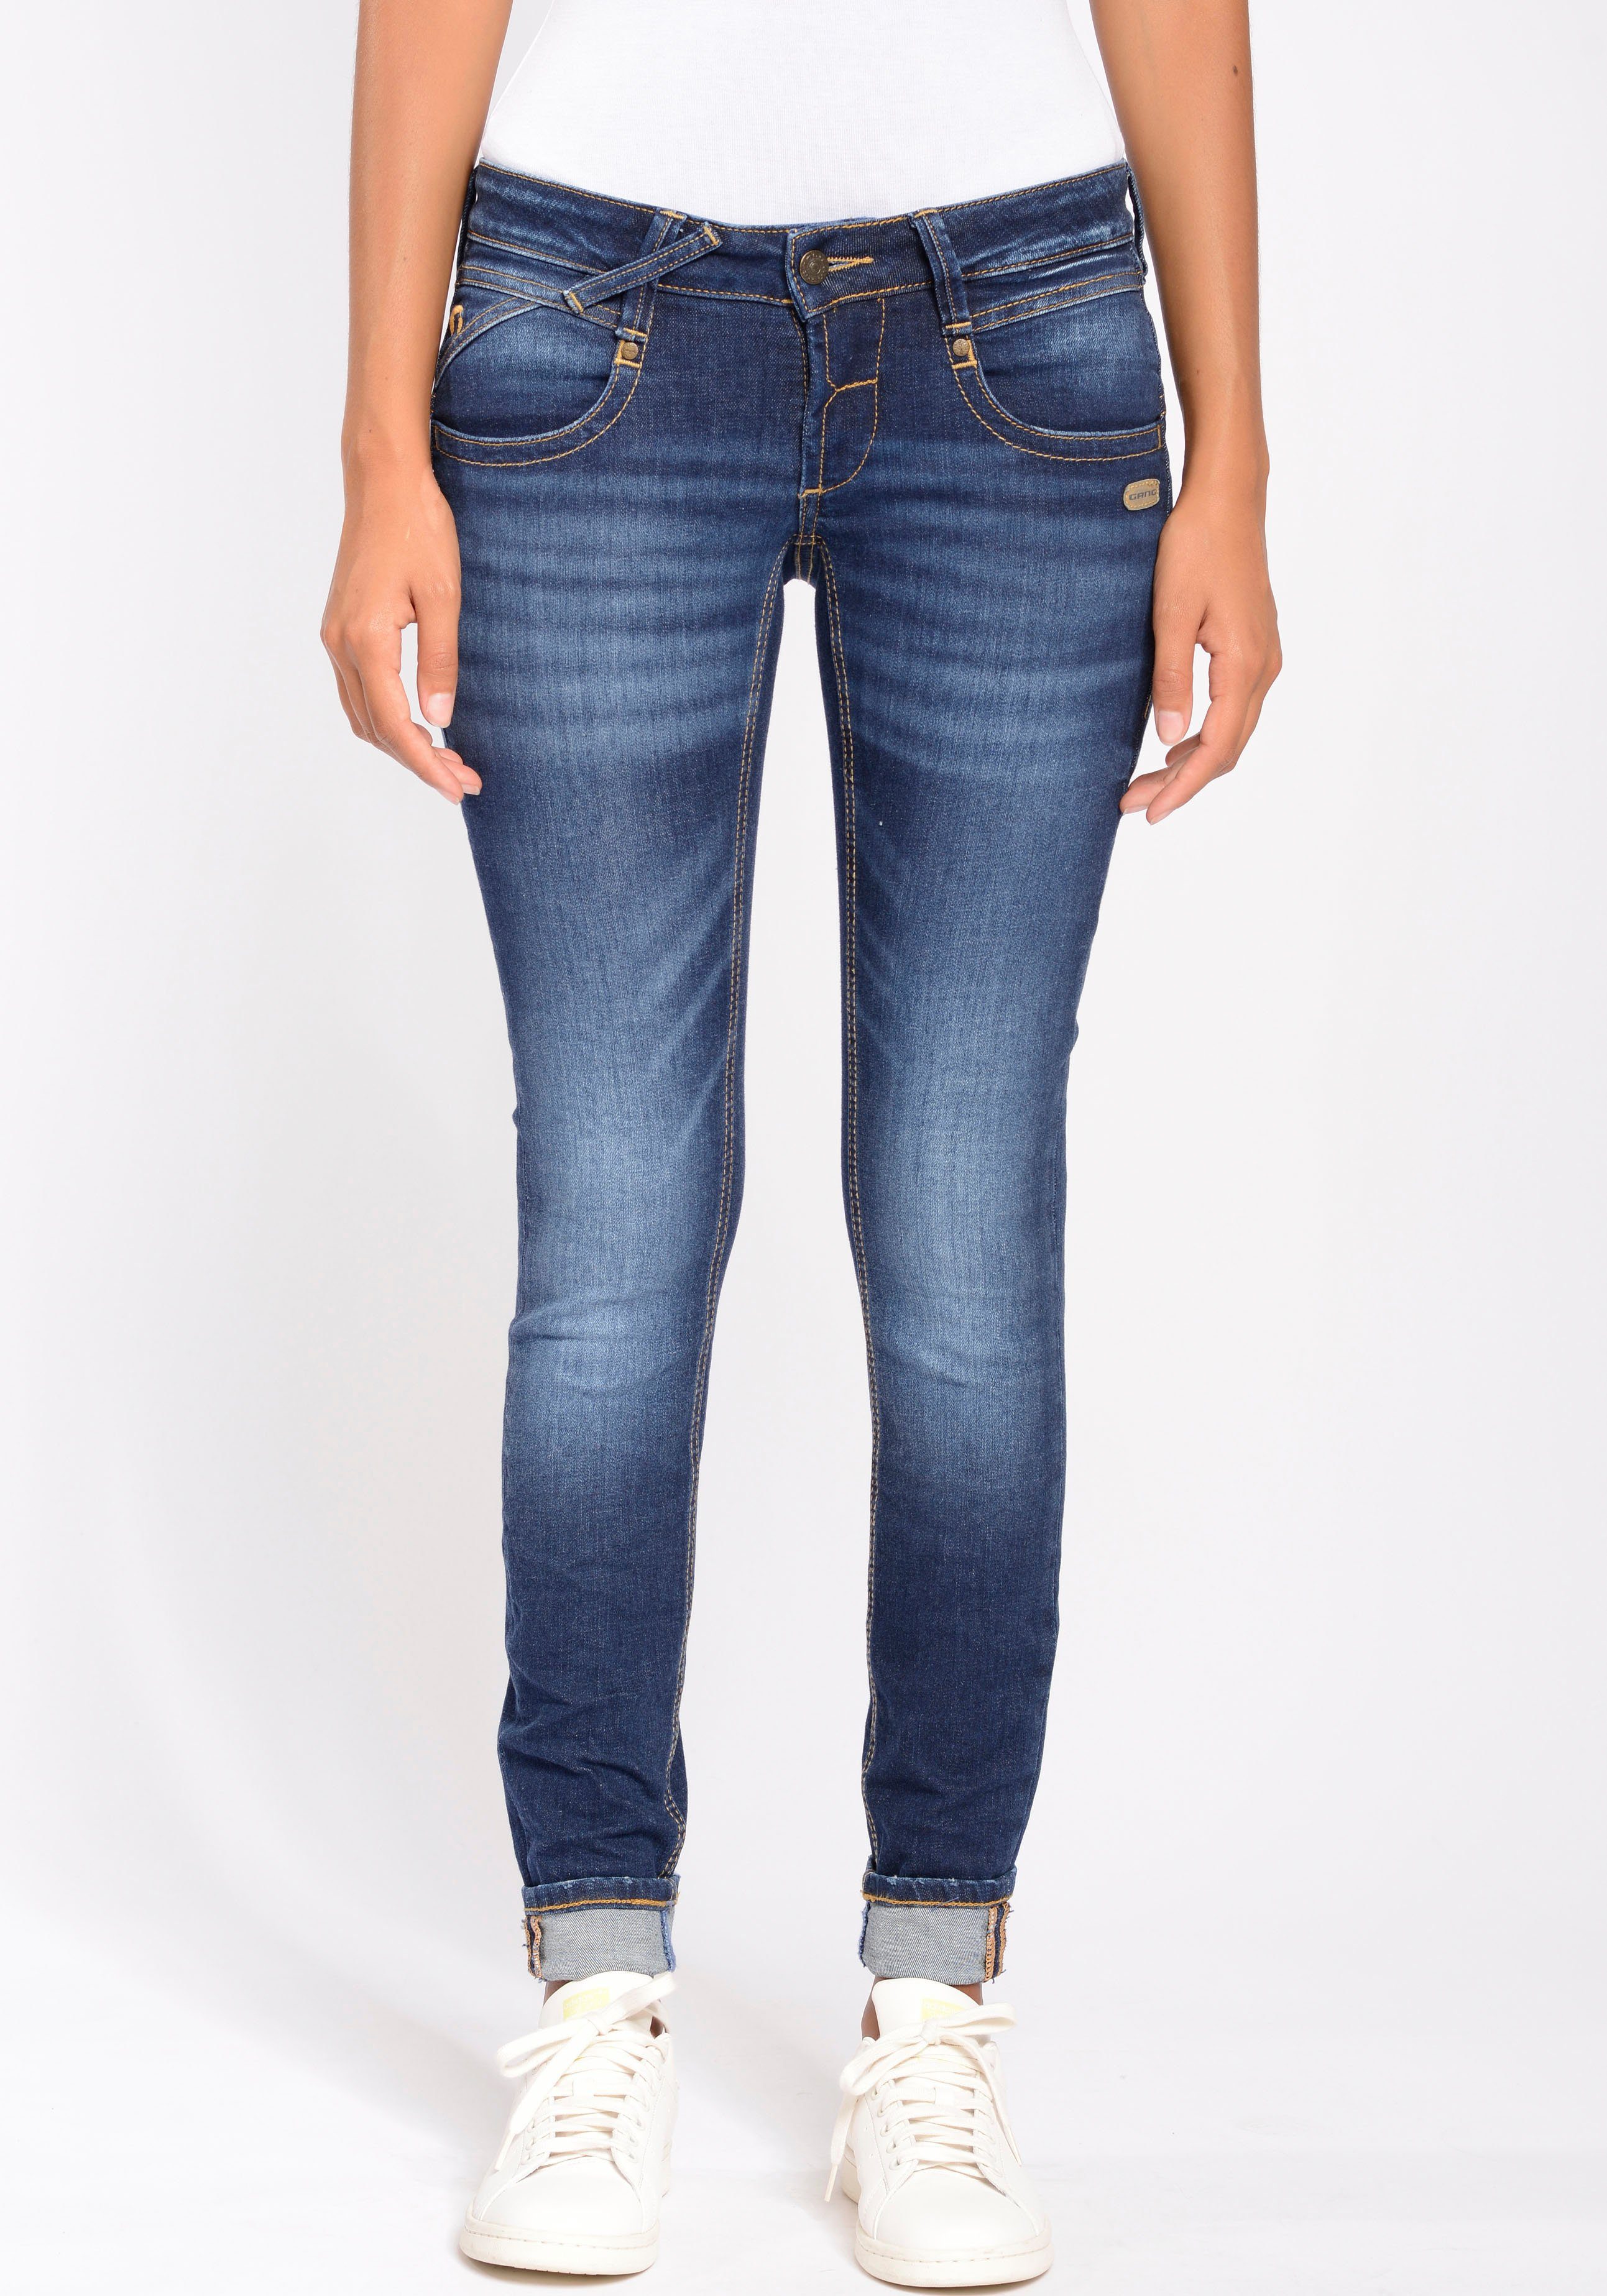 GANG Skinny-fit-Jeans 94NENA mit niedriger Leibhöhe | Stretchjeans